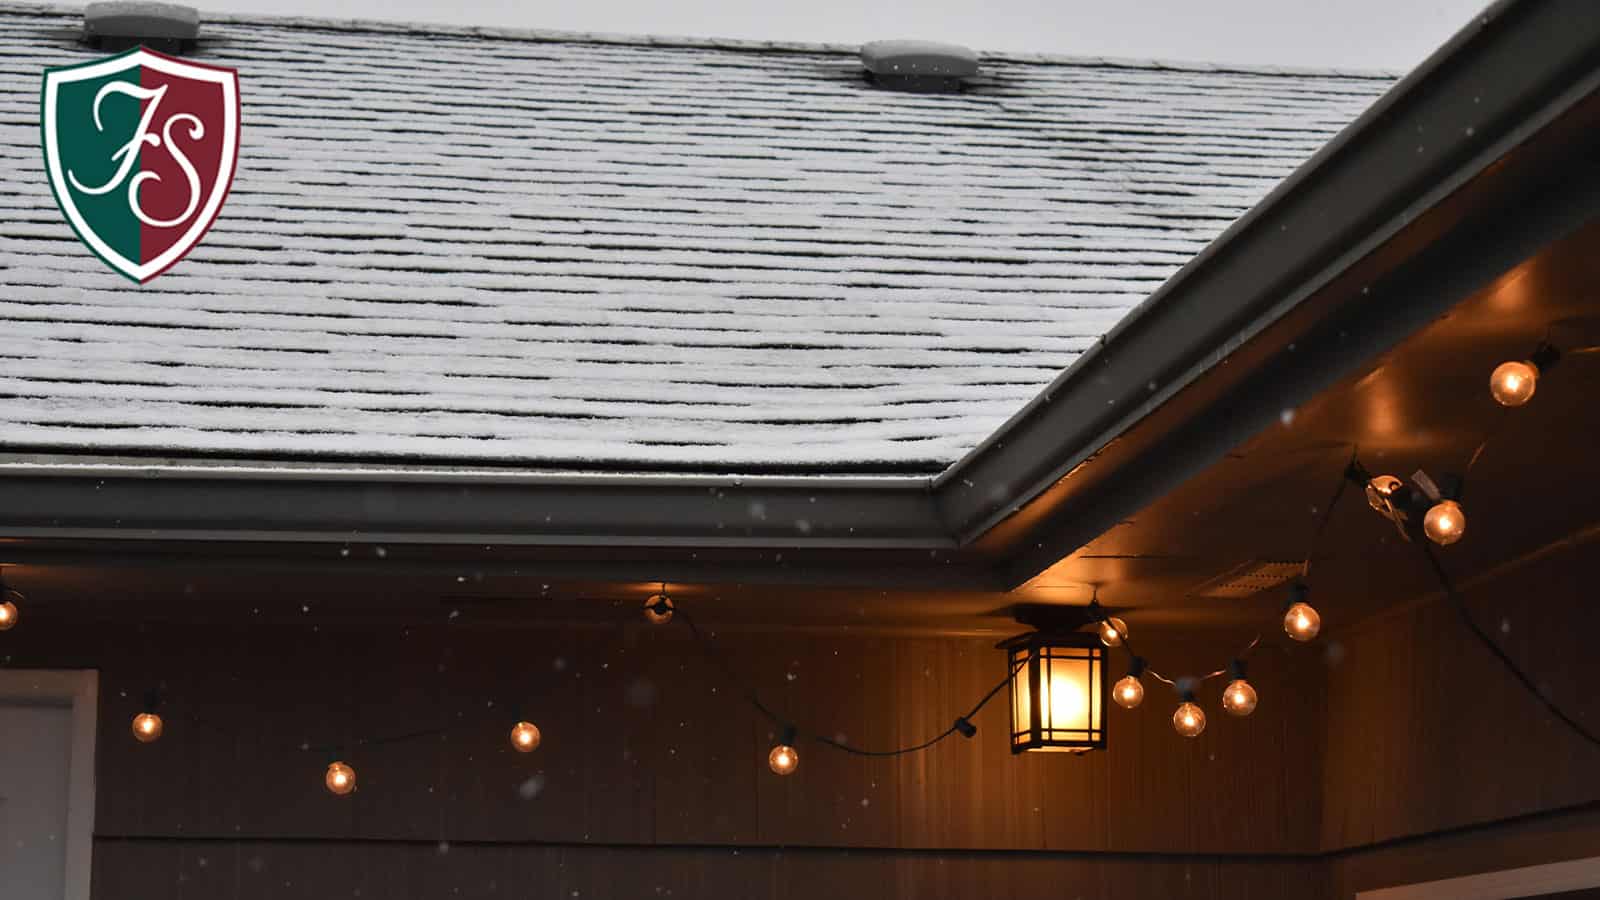 Don’t let roofing problems ruin your Christmas.